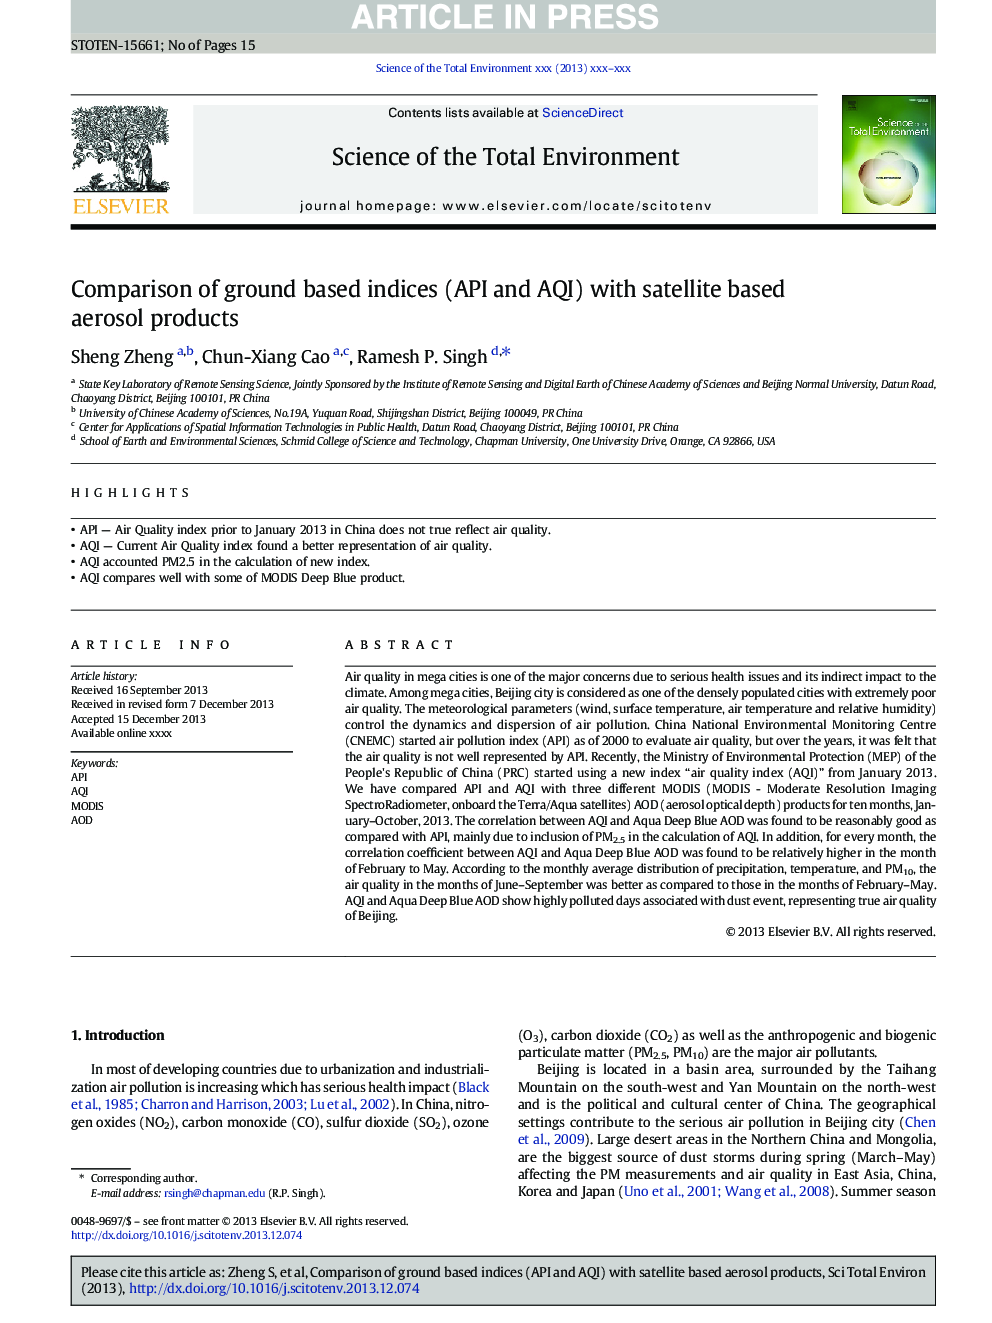 Comparison of ground based indices (API and AQI) with satellite based aerosol products